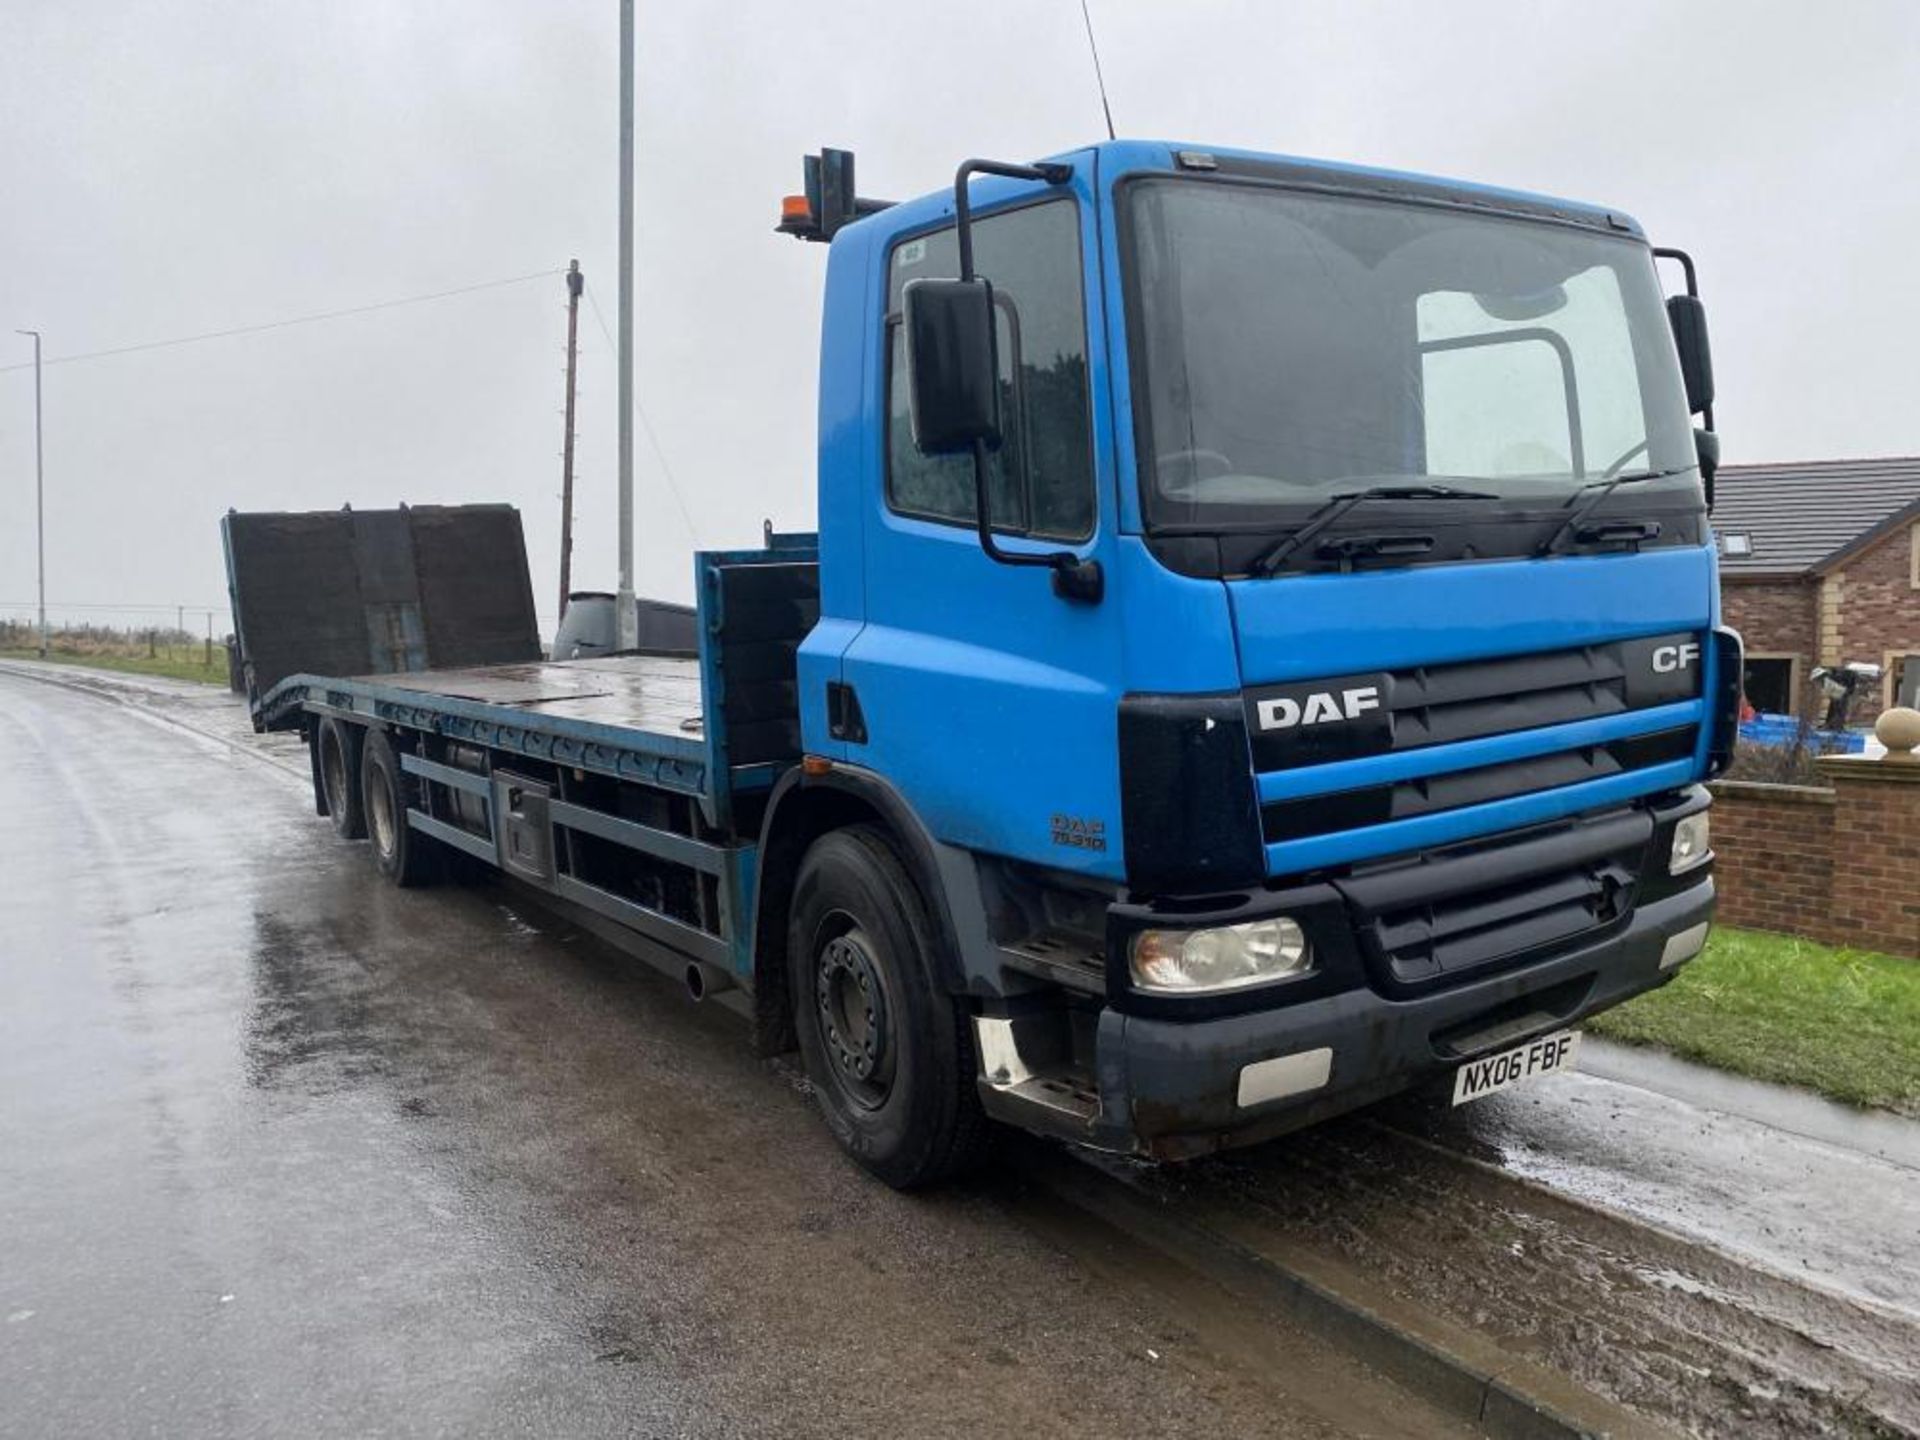 DAF 75 6X2 BEAVERTAIL RECOVERY - Image 2 of 9